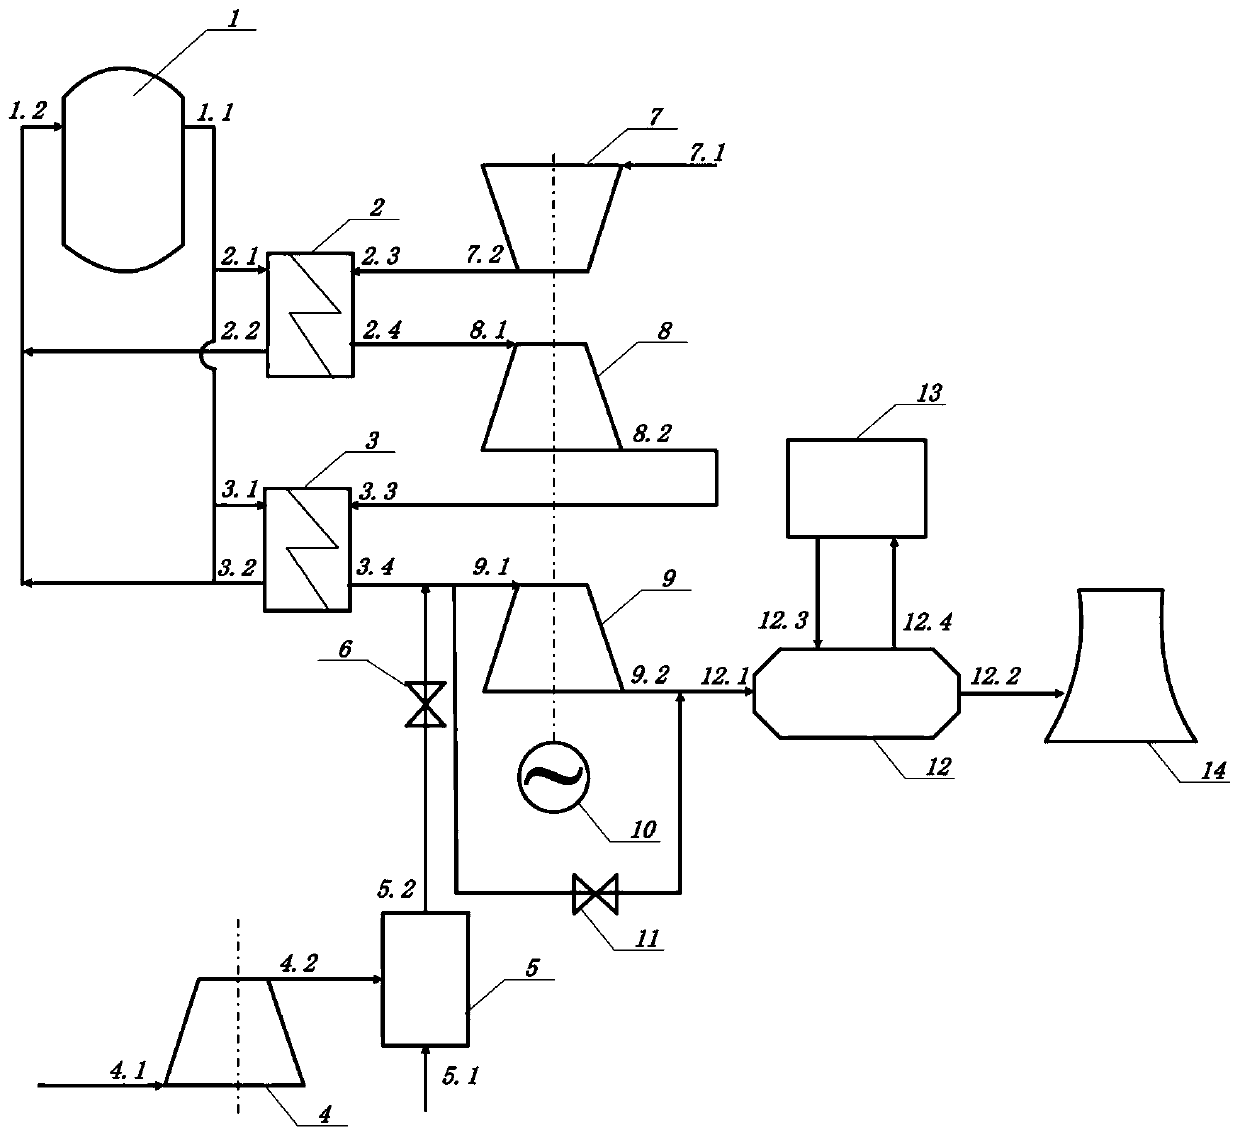 A nuclear steam-Braton combined cycle power generation system